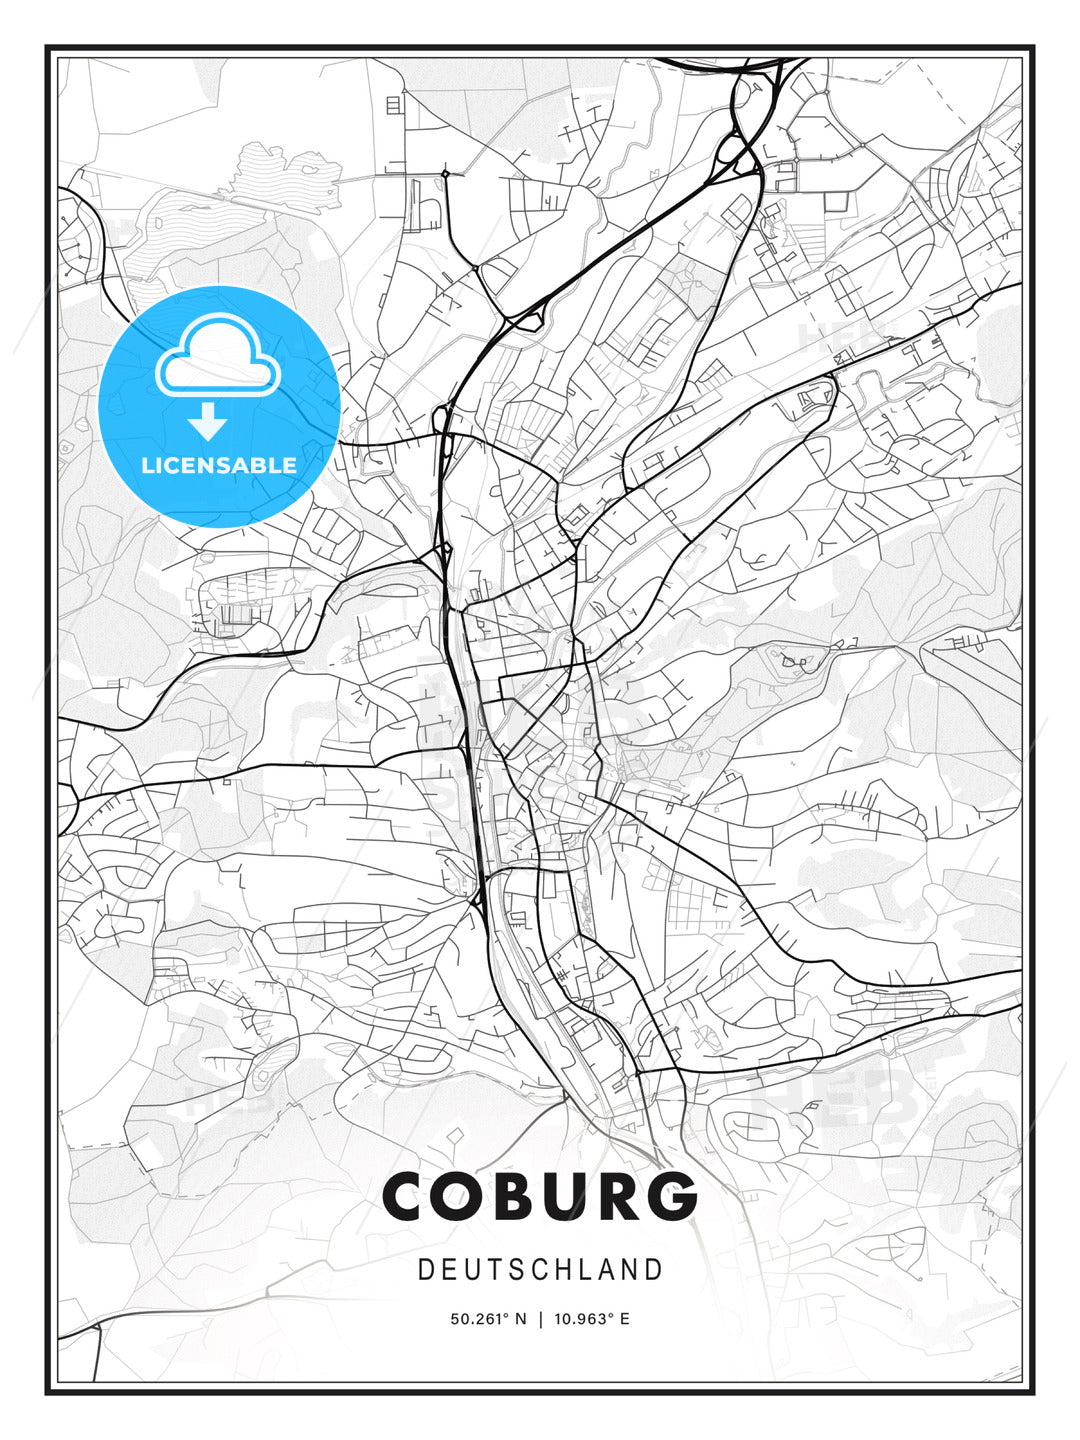 Coburg, Germany, Modern Print Template in Various Formats - HEBSTREITS Sketches